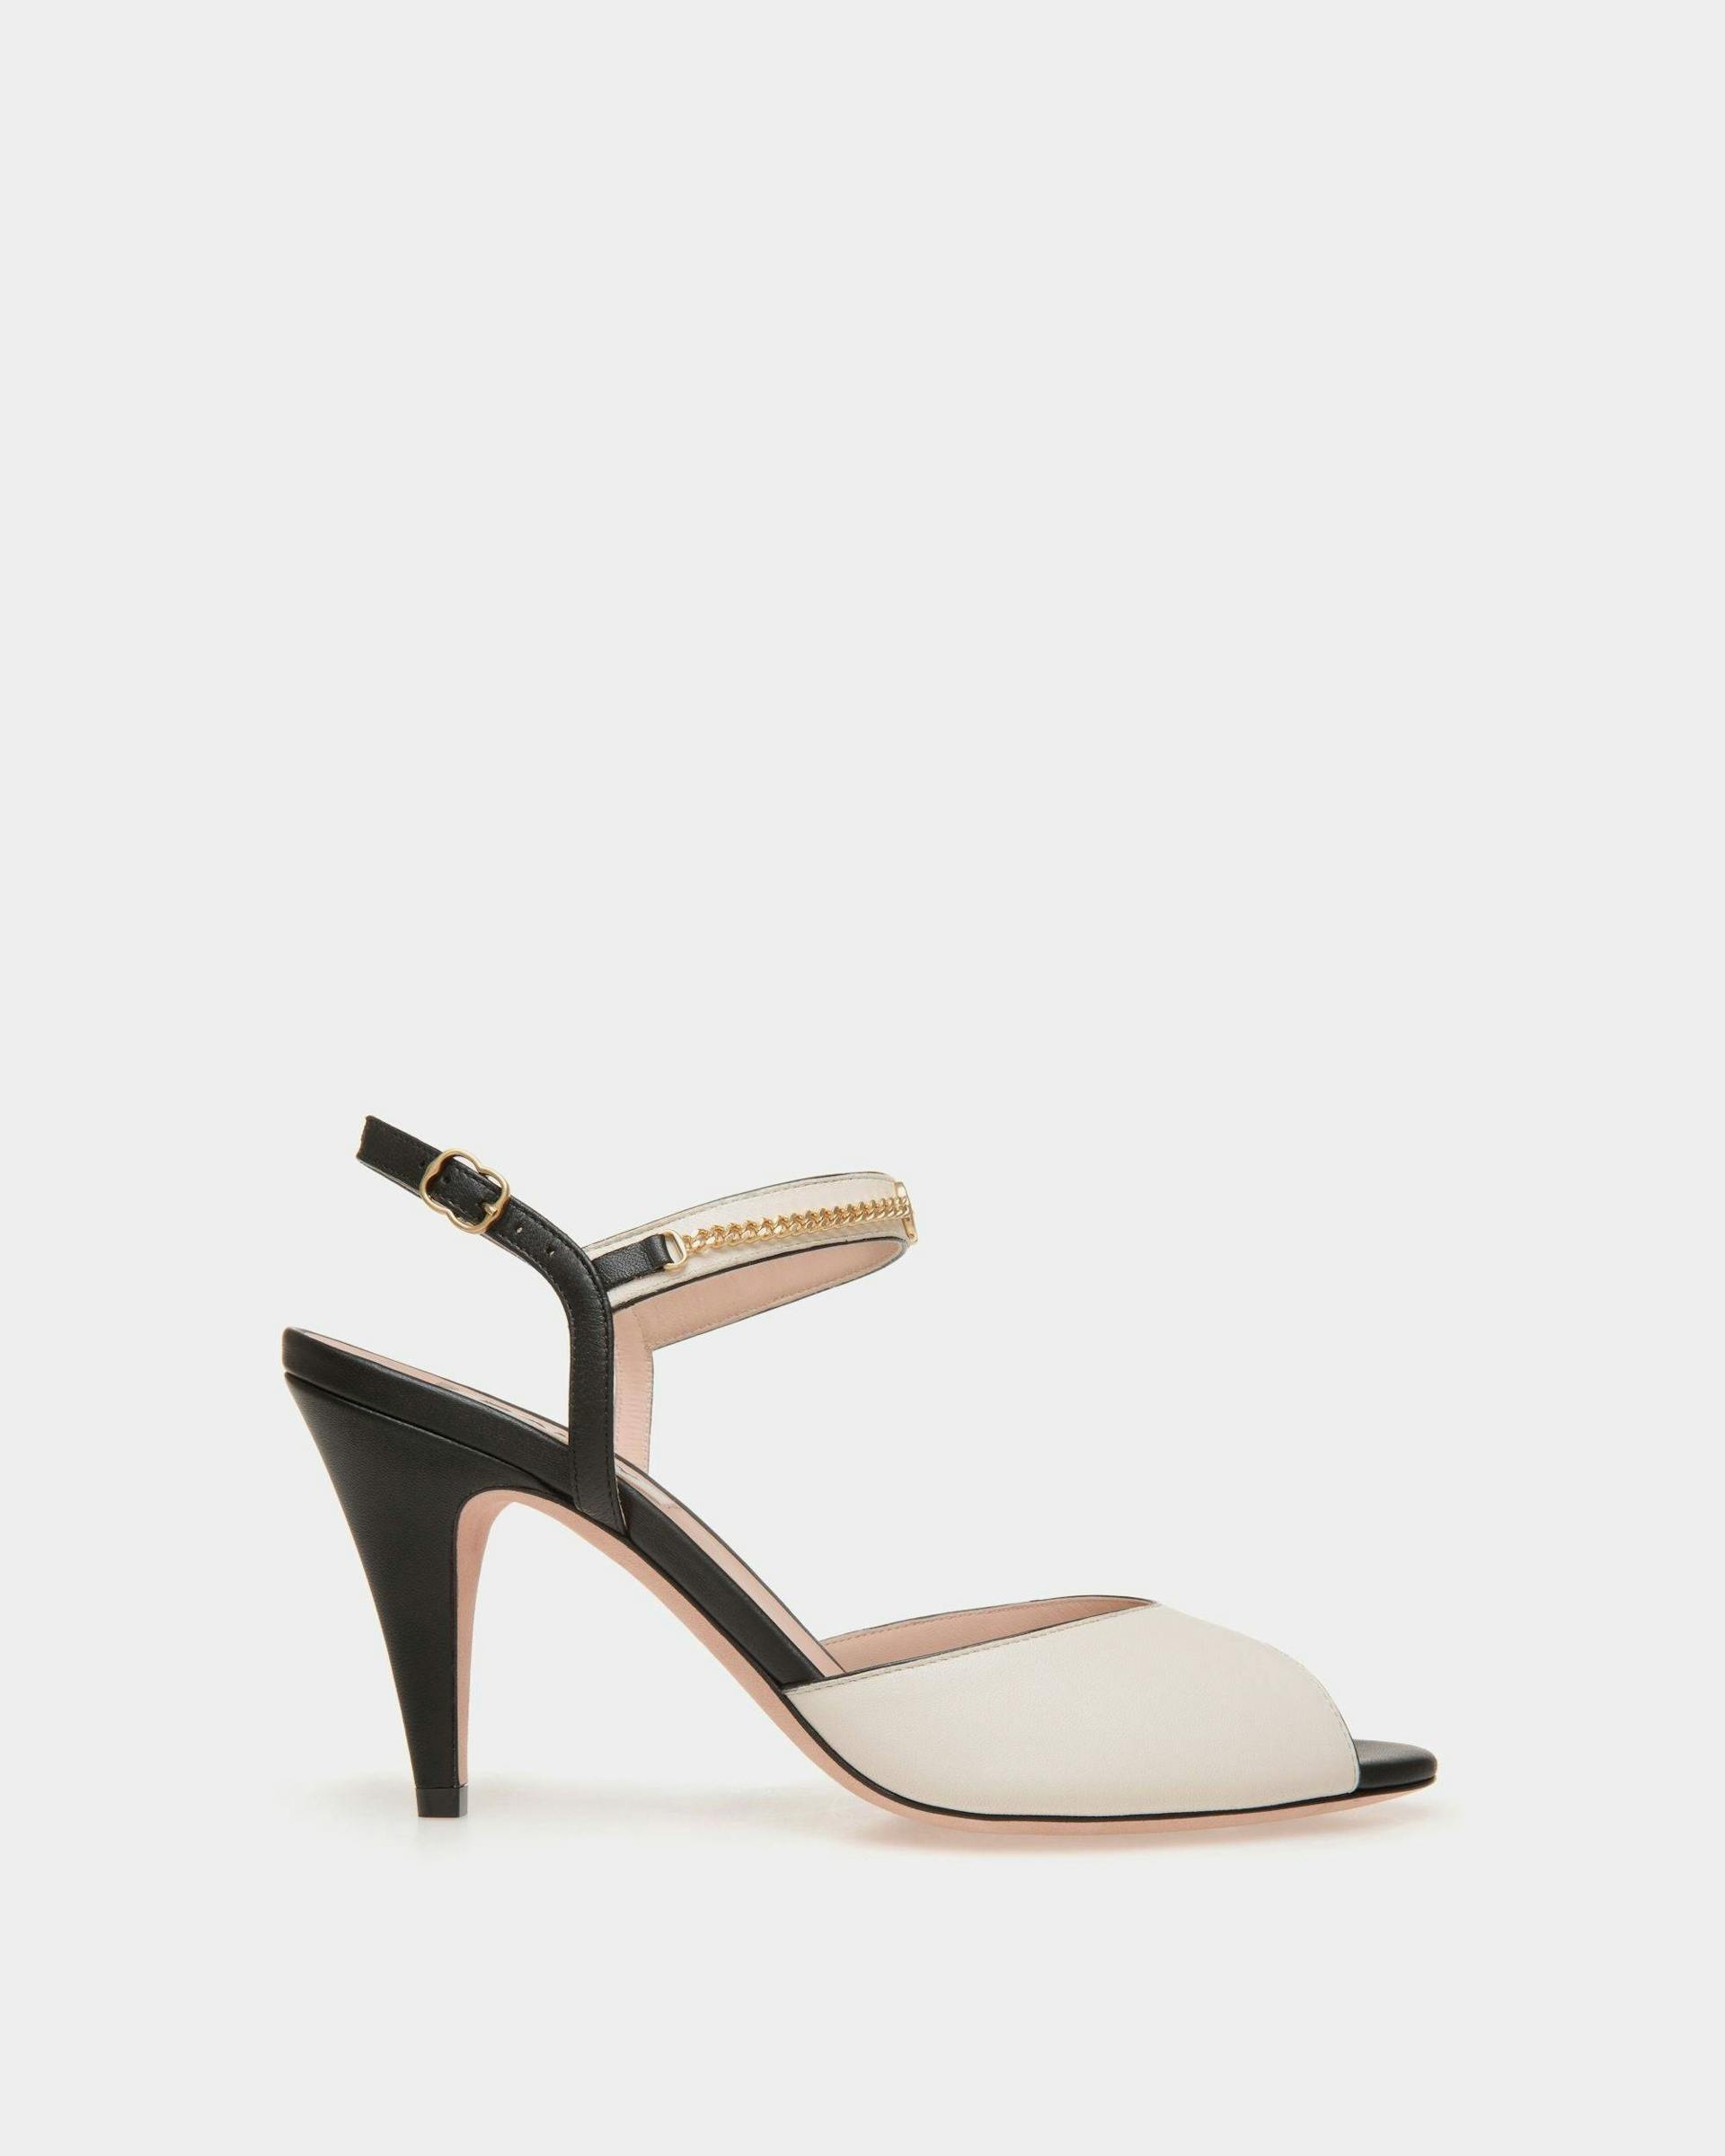 Women's Daily Emblem Heeled Sandal in Black and White Leather | Bally | Still Life Side